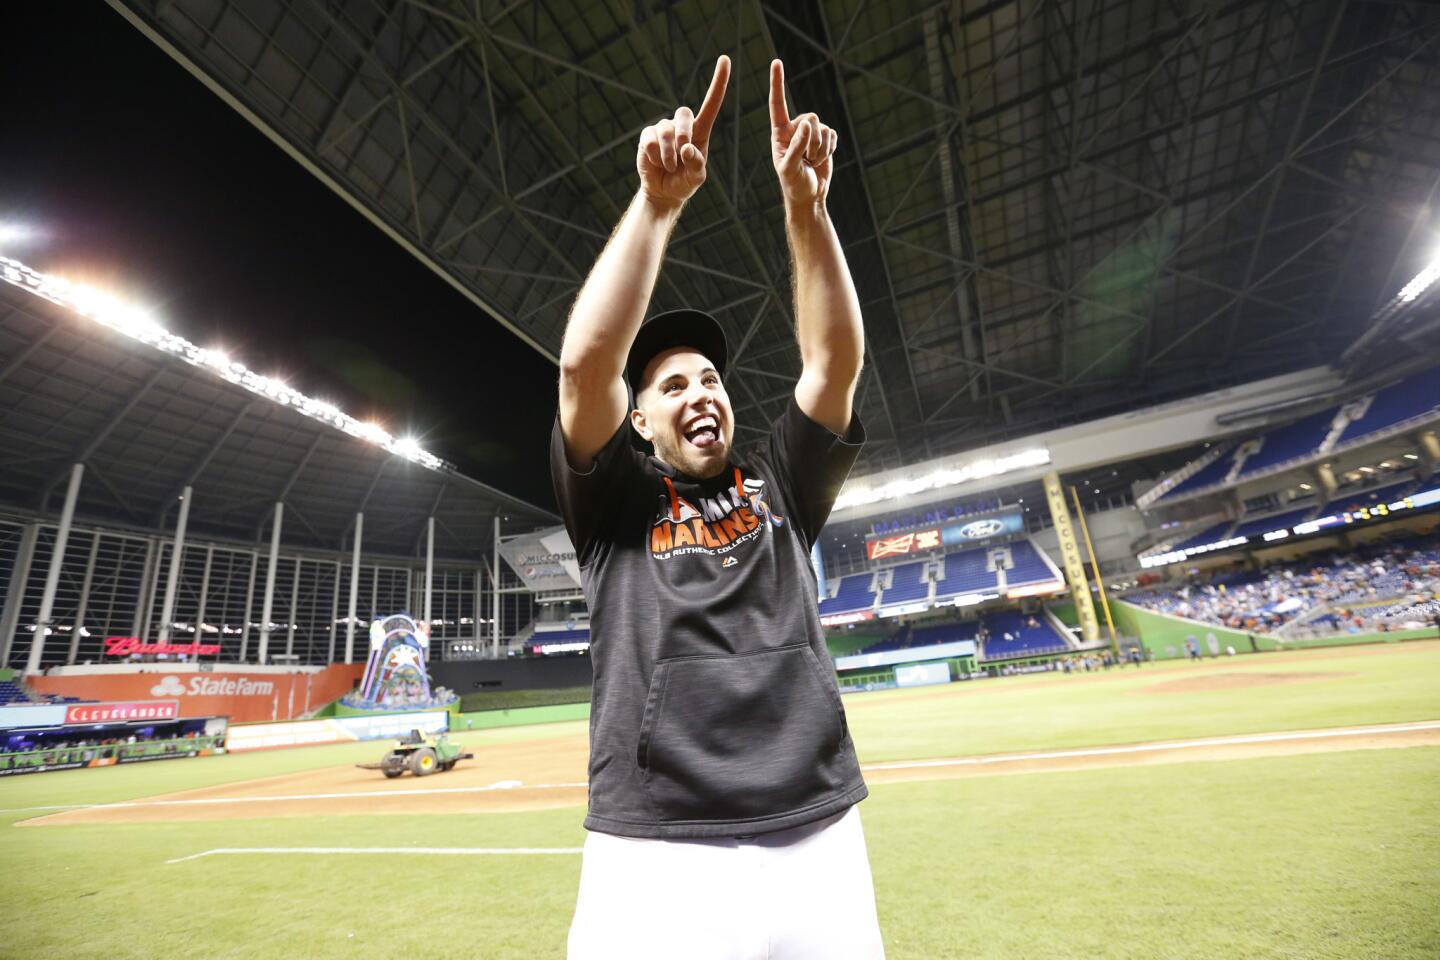 Miami Marlins pitcher Jose Fernandez holds his National League All-Star  jersey before the Marlins' baseball game against the Washington Nationals  on Friday, July 12, 2013, in Miami. (AP Photo/El Nuevo Herald, David